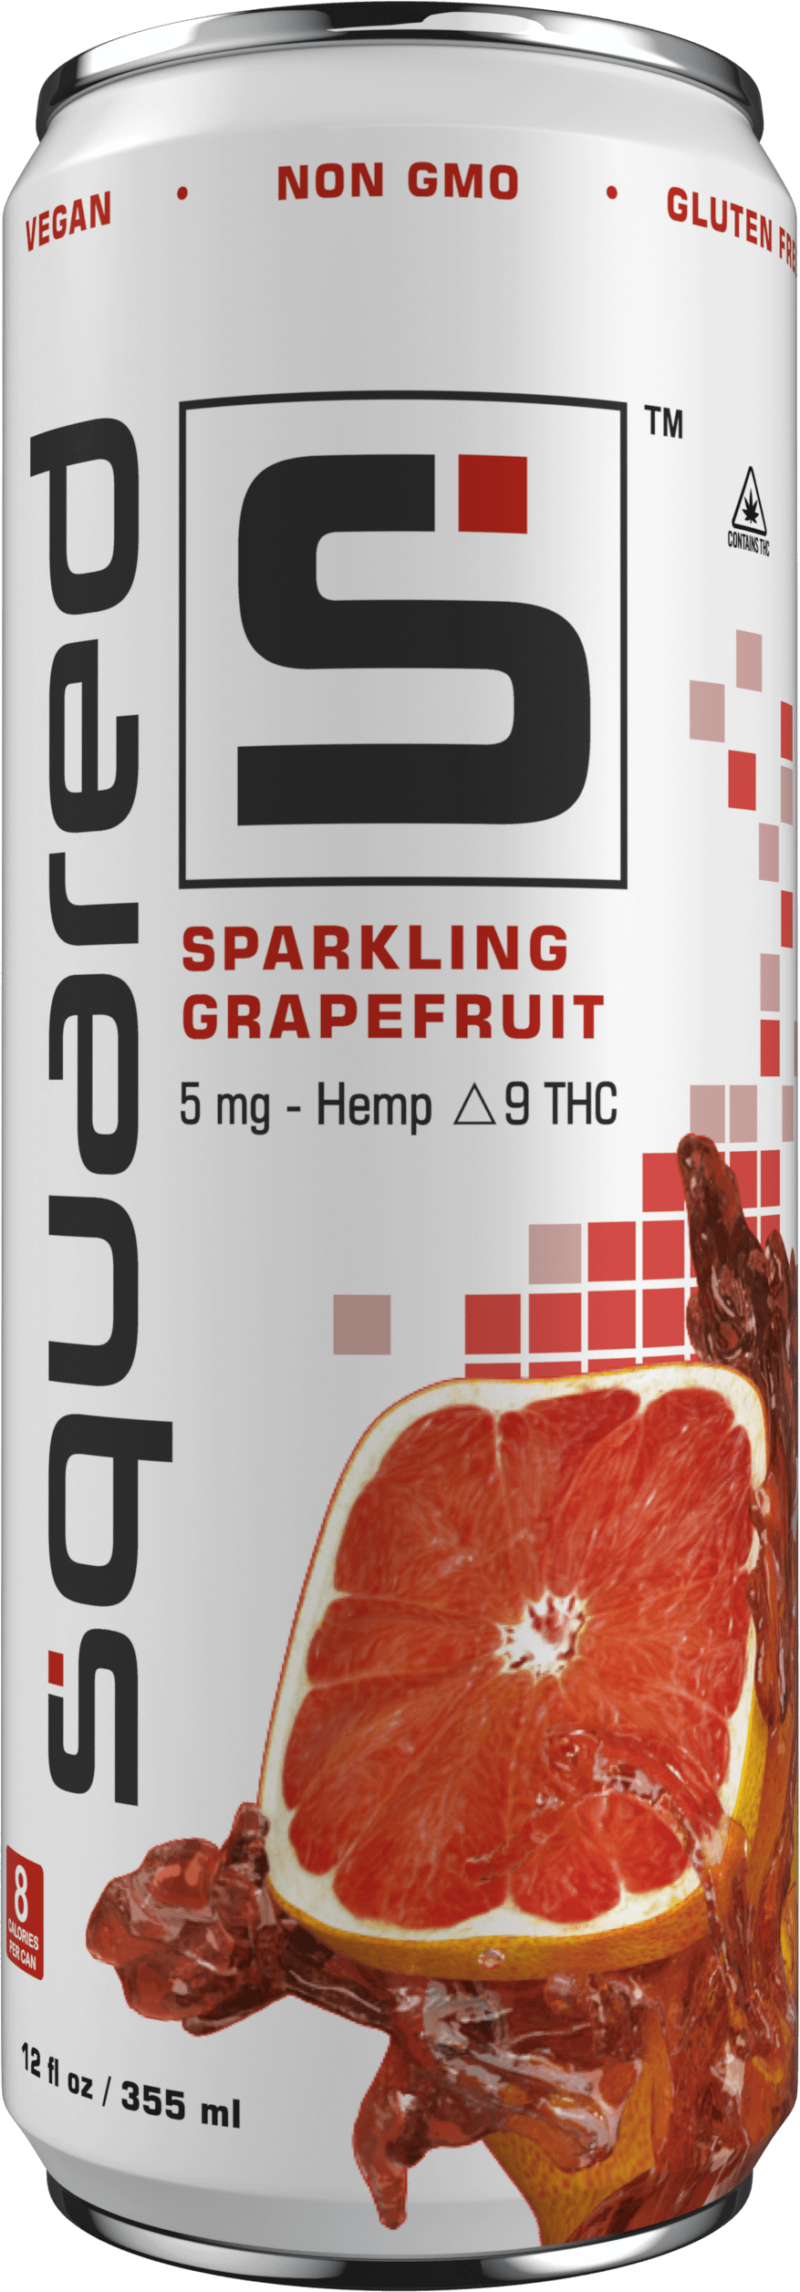 12 ounce sleek aluminum can of Sparkling Grapefruit by Squared